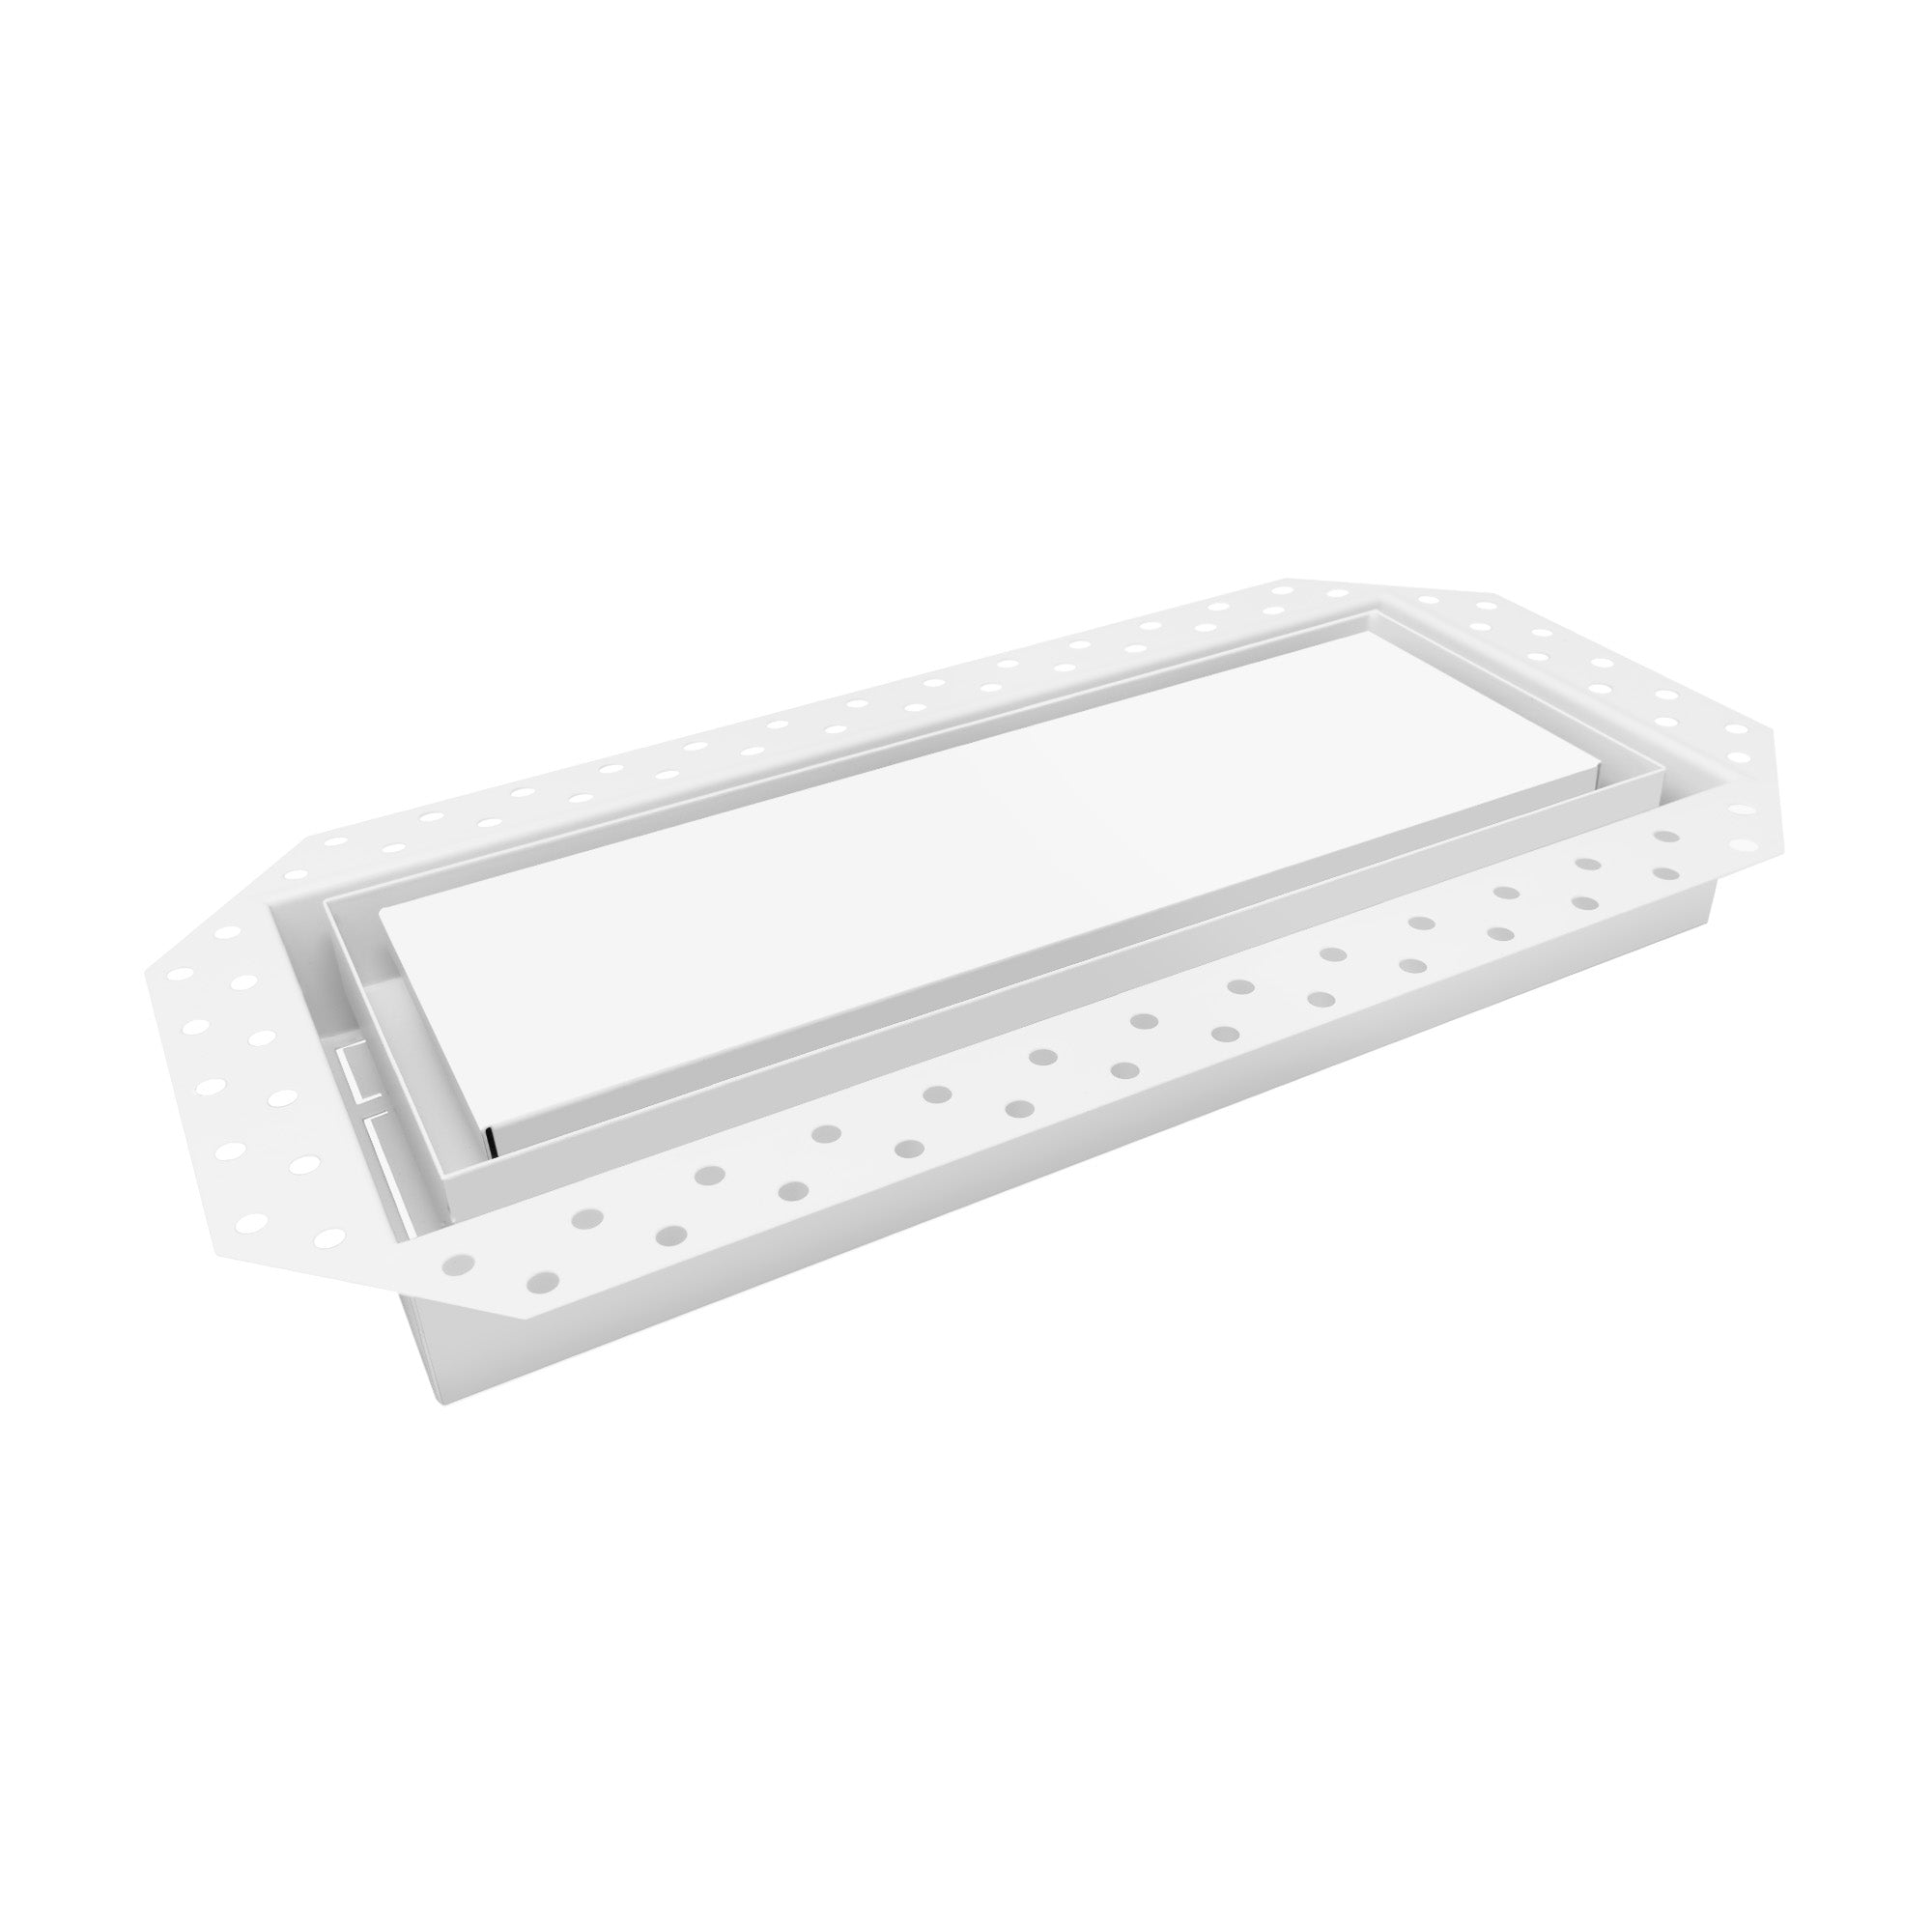 Aria Luxe+ Flush High Performance Wall Vent